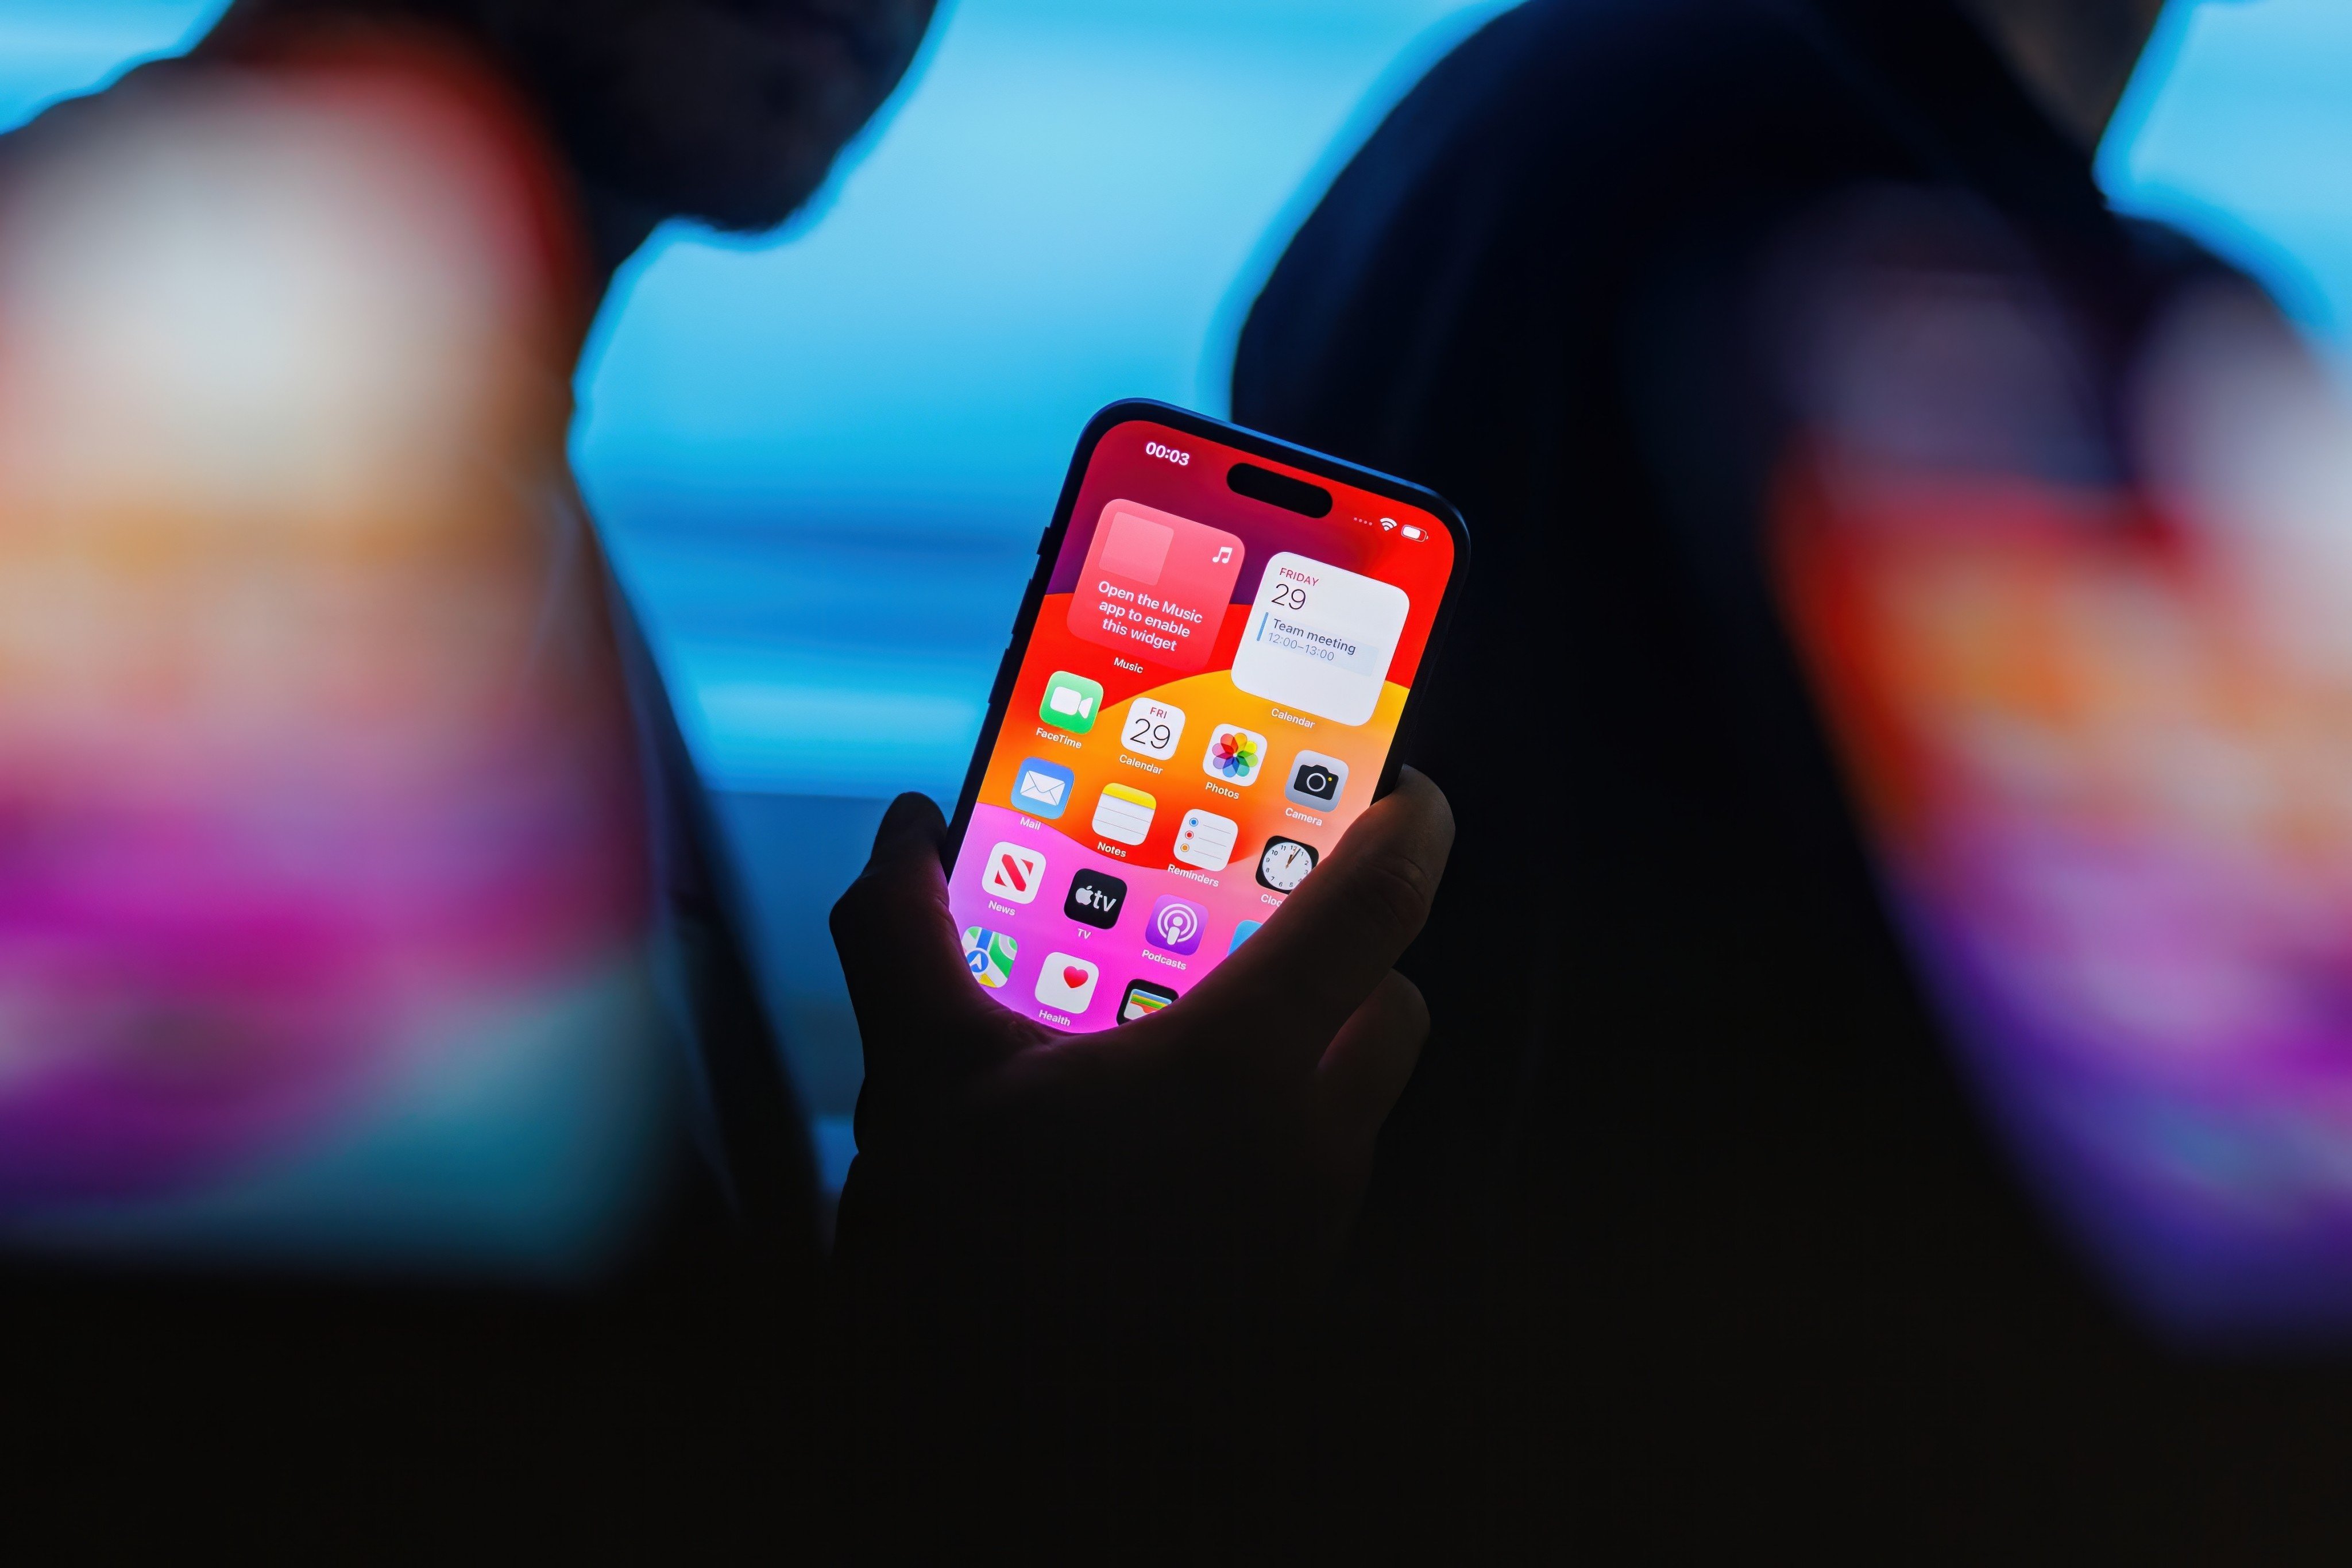 In the March quarter, the iPhone’s share of the mainland smartphone market shrank to 15.7 per cent, down from 20.2 per cent a year earlier, amid stiff domestic competition. Photo: Shutterstock